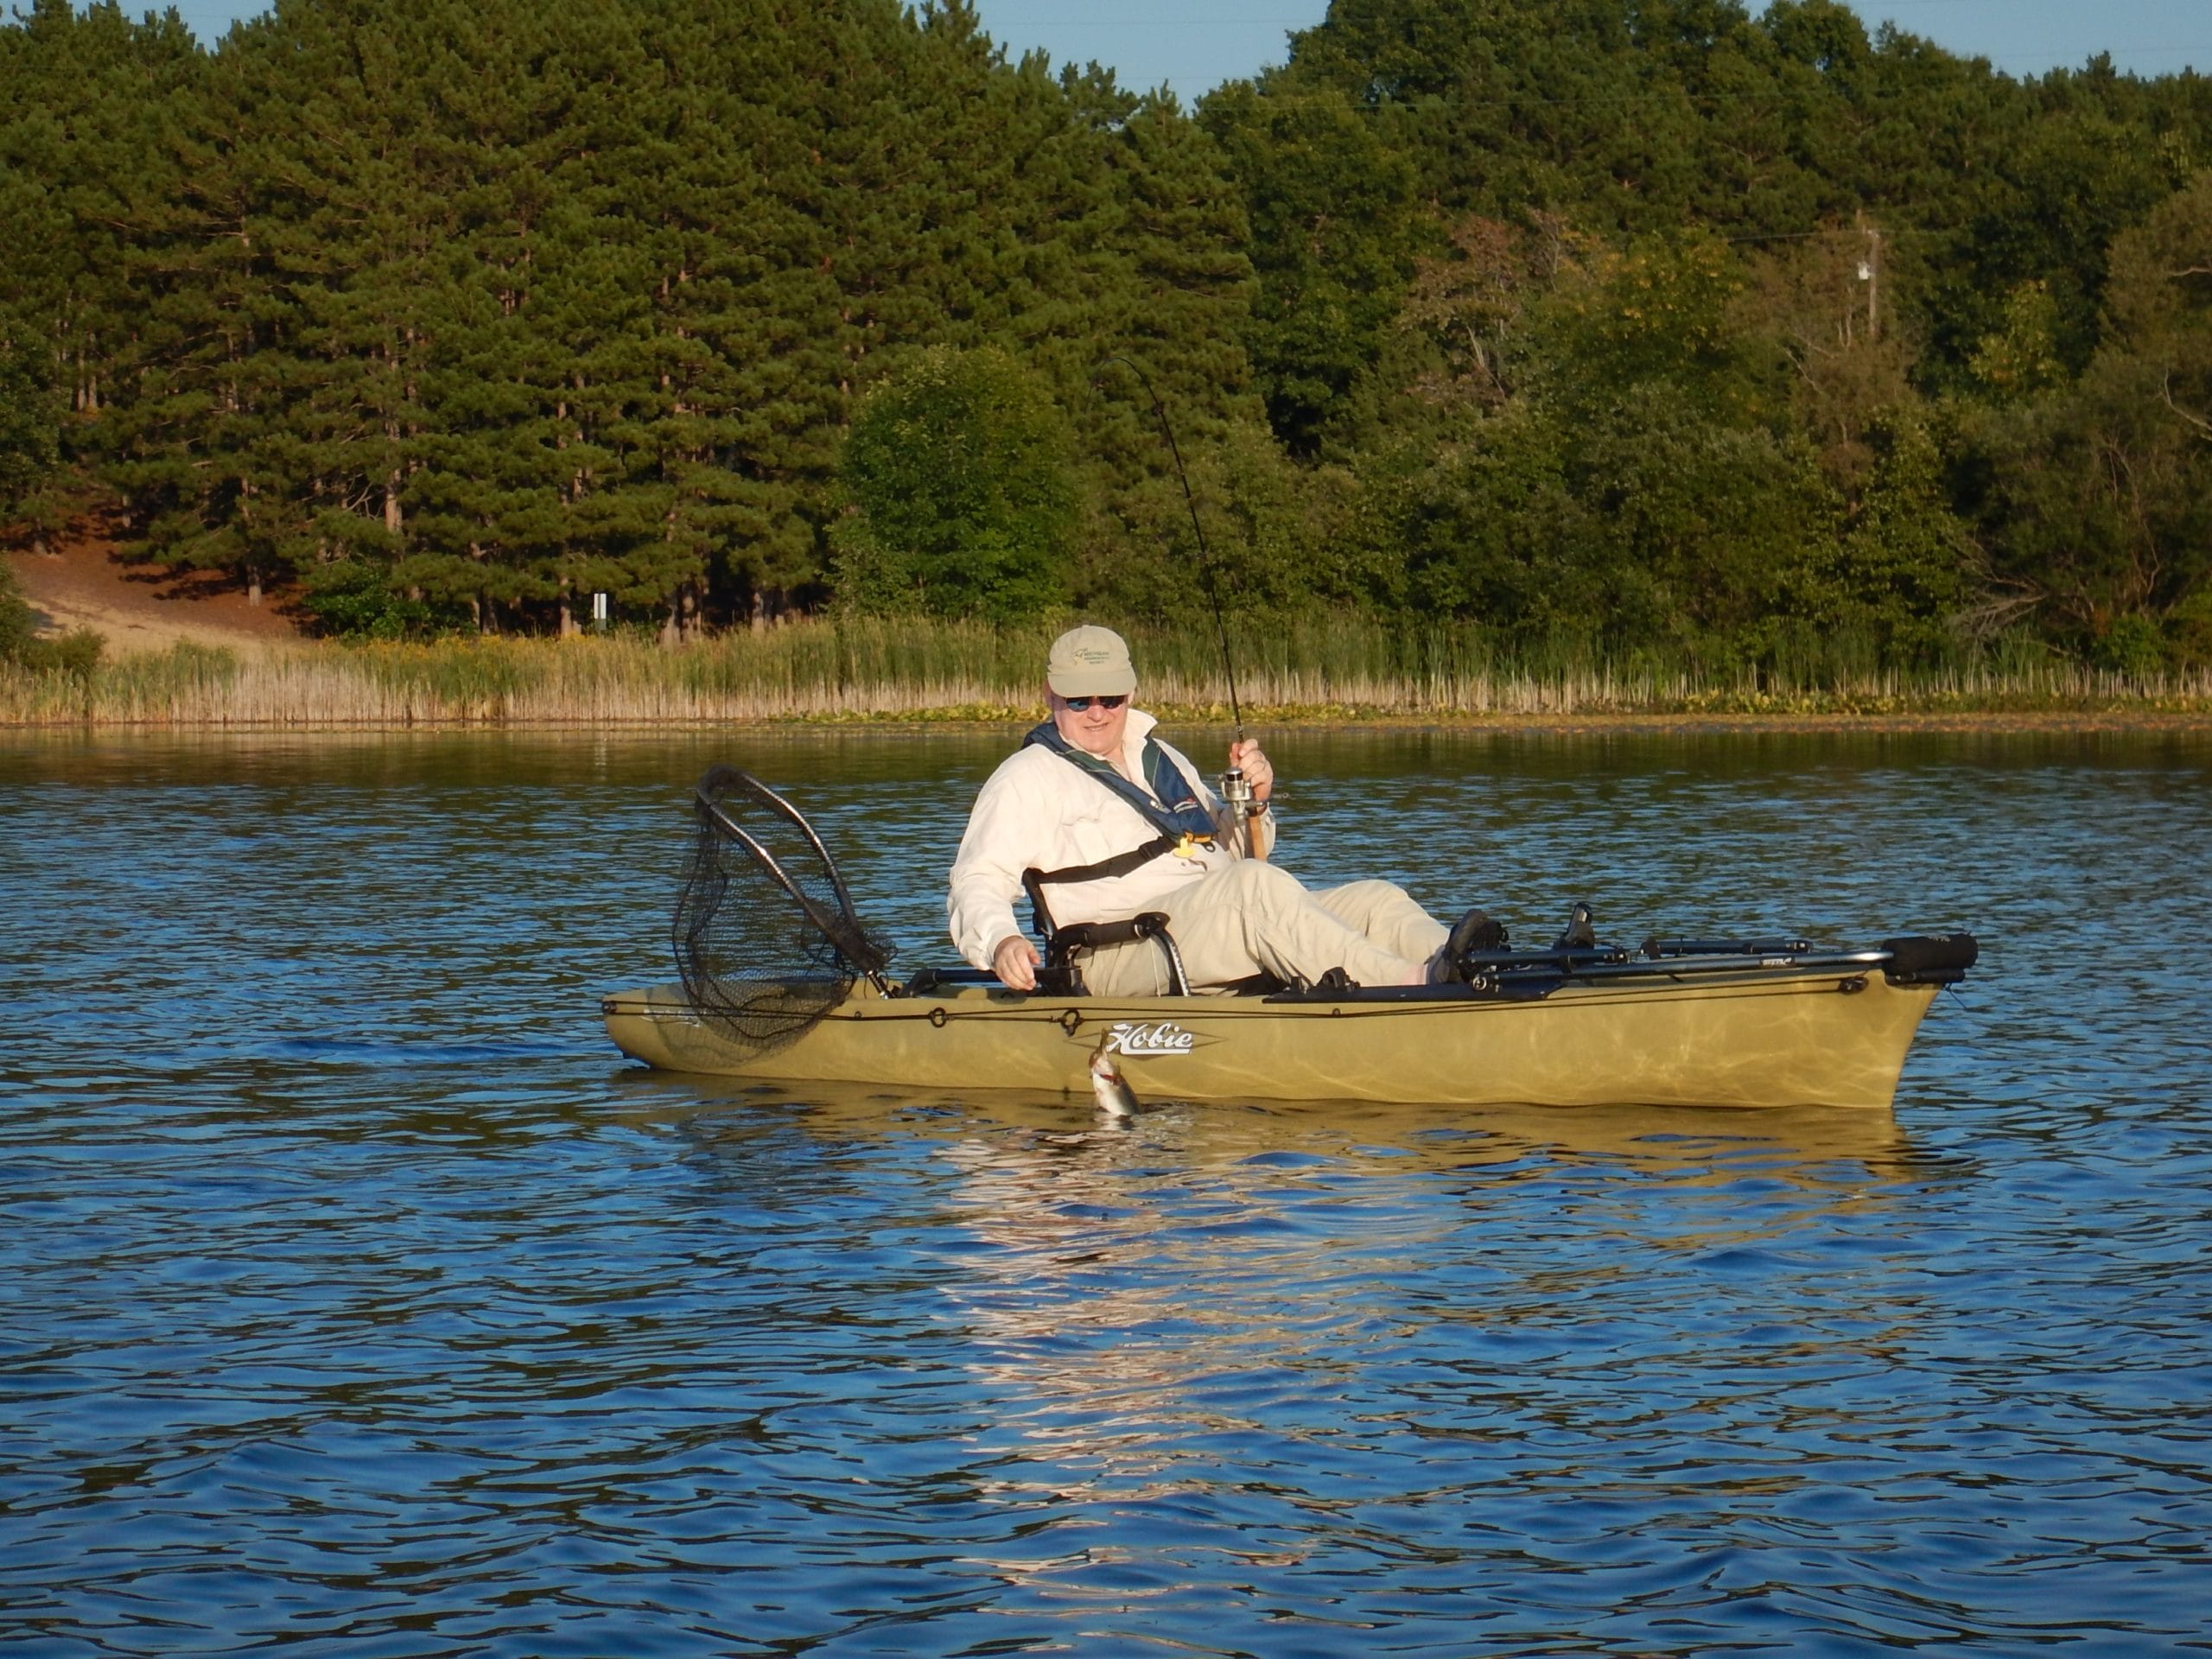 This 12-foot kayak has its rod holders removed while the angler casts for bass.